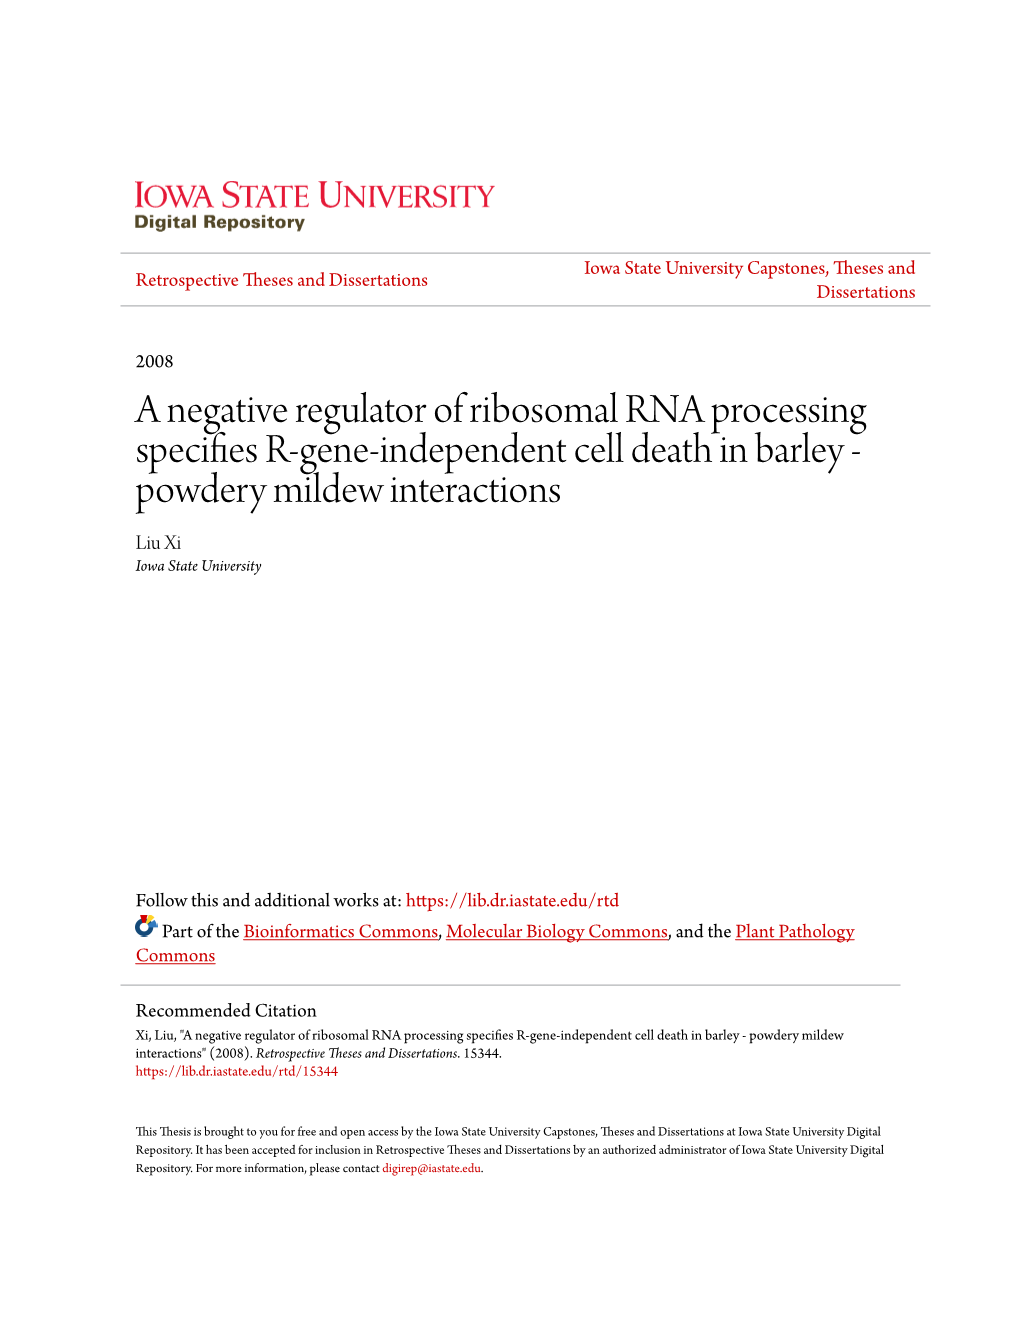 A Negative Regulator of Ribosomal RNA Processing Specifies R-Gene-Independent Cell Death in Barley - Powdery Mildew Interactions" (2008)